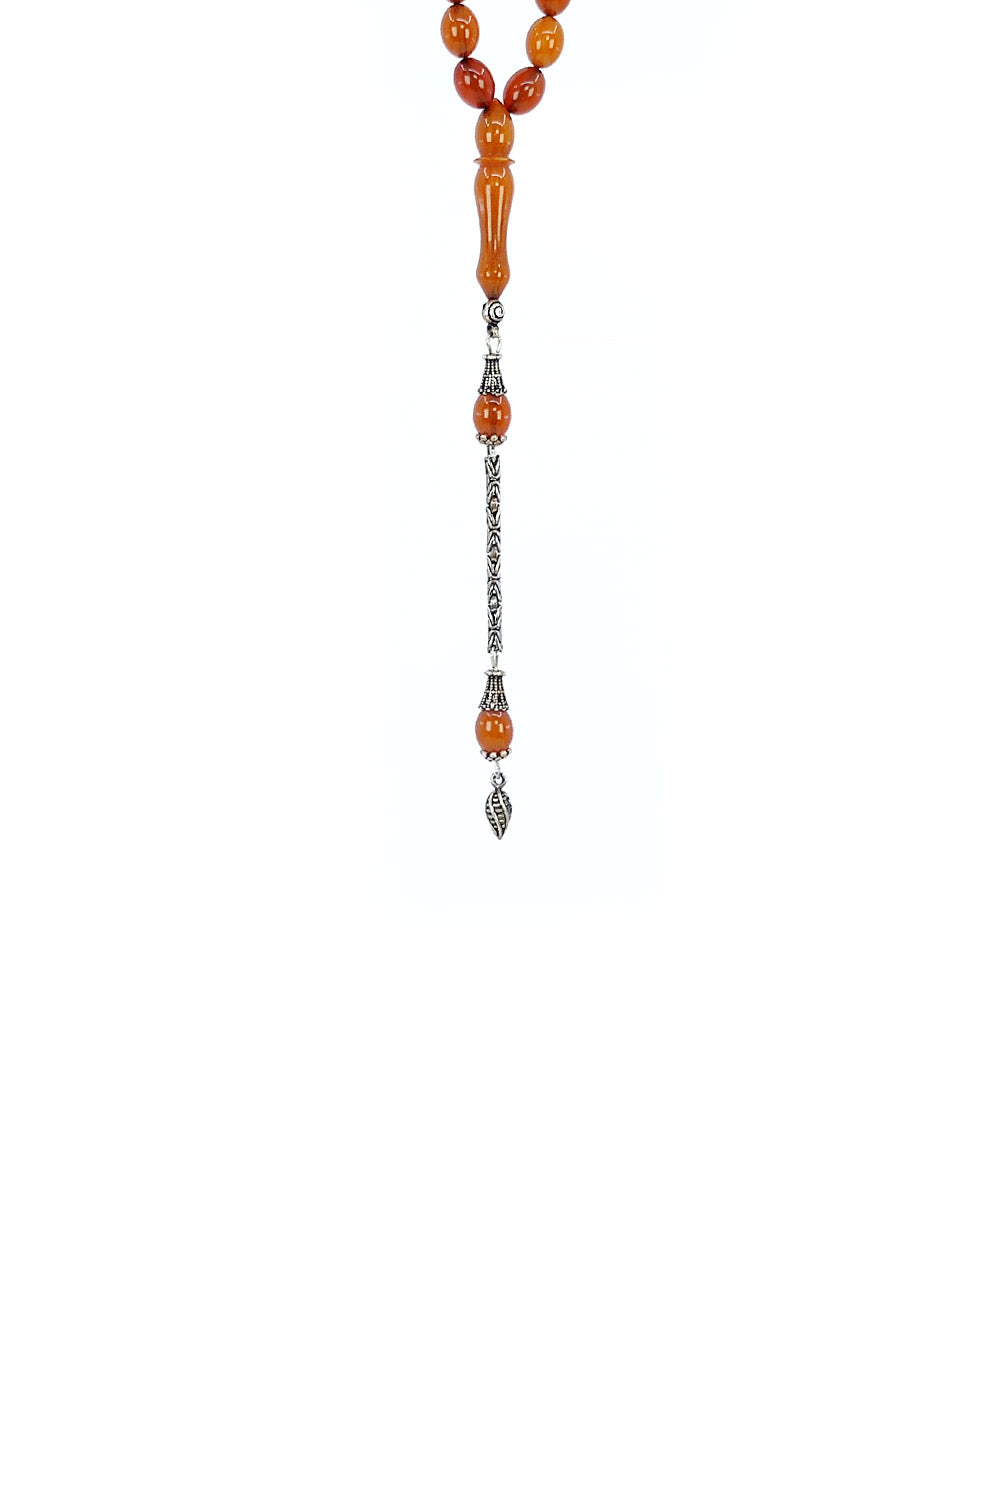 Ve Tesbih Solid Amber Prayer Beads with Silver Tassels 3